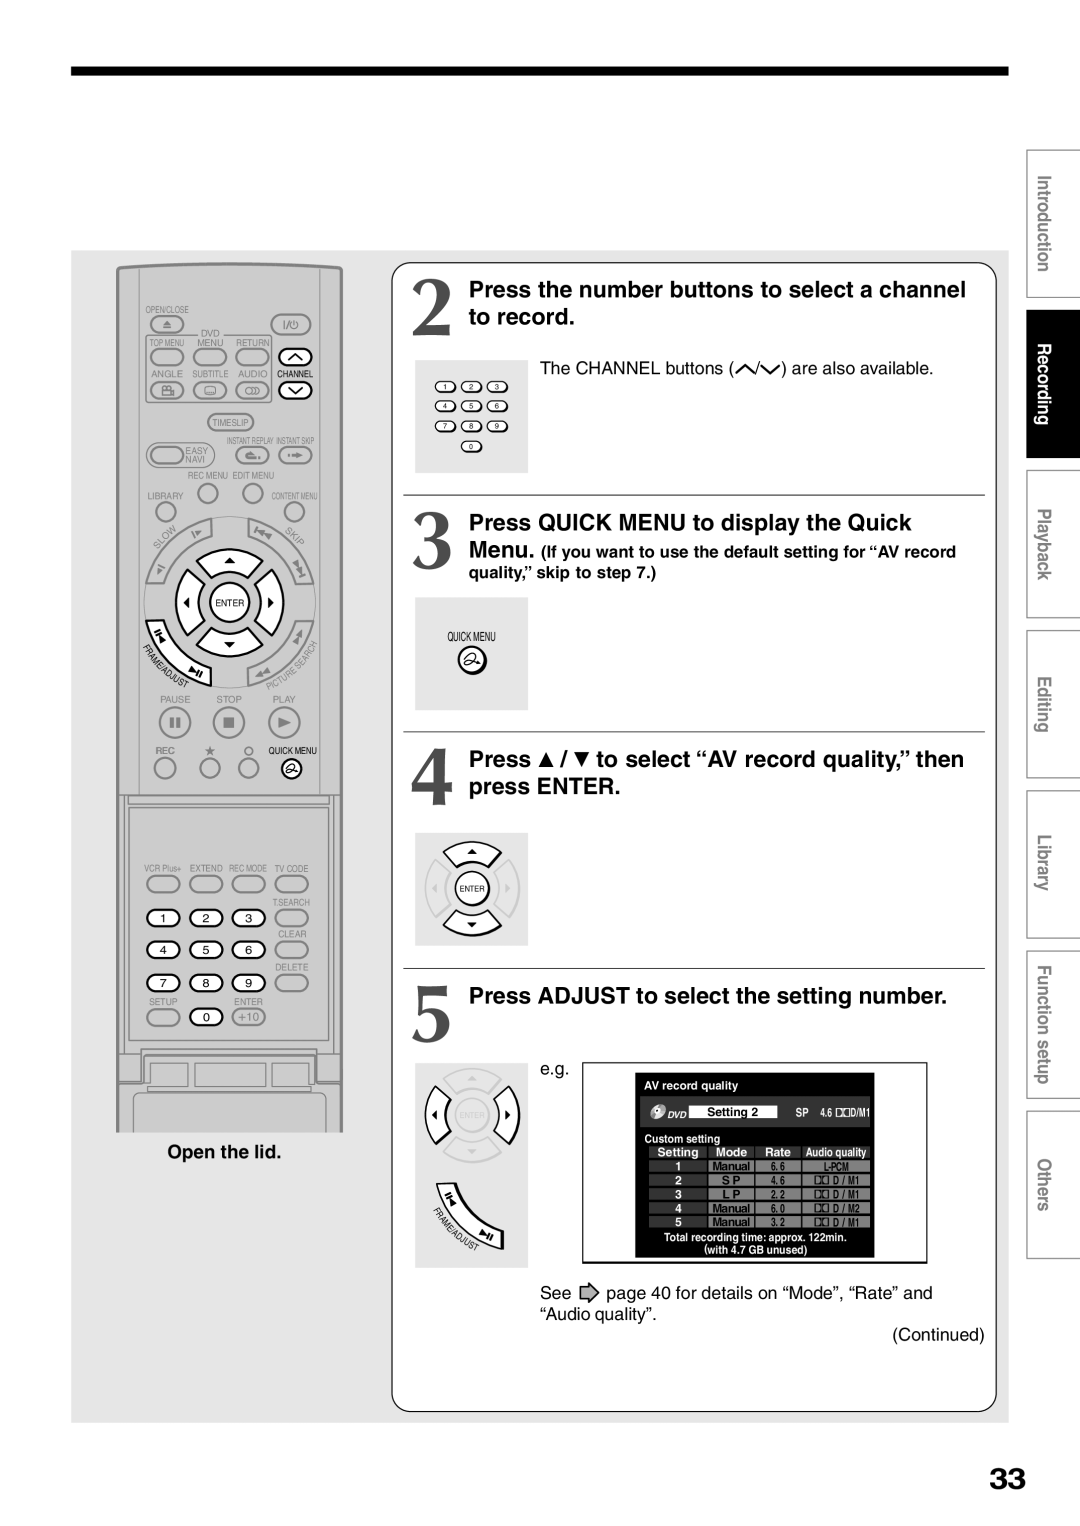 Toshiba D-R2SU Press the number buttons to select a channel to record, Press ADJUST to select the setting number, Setting 